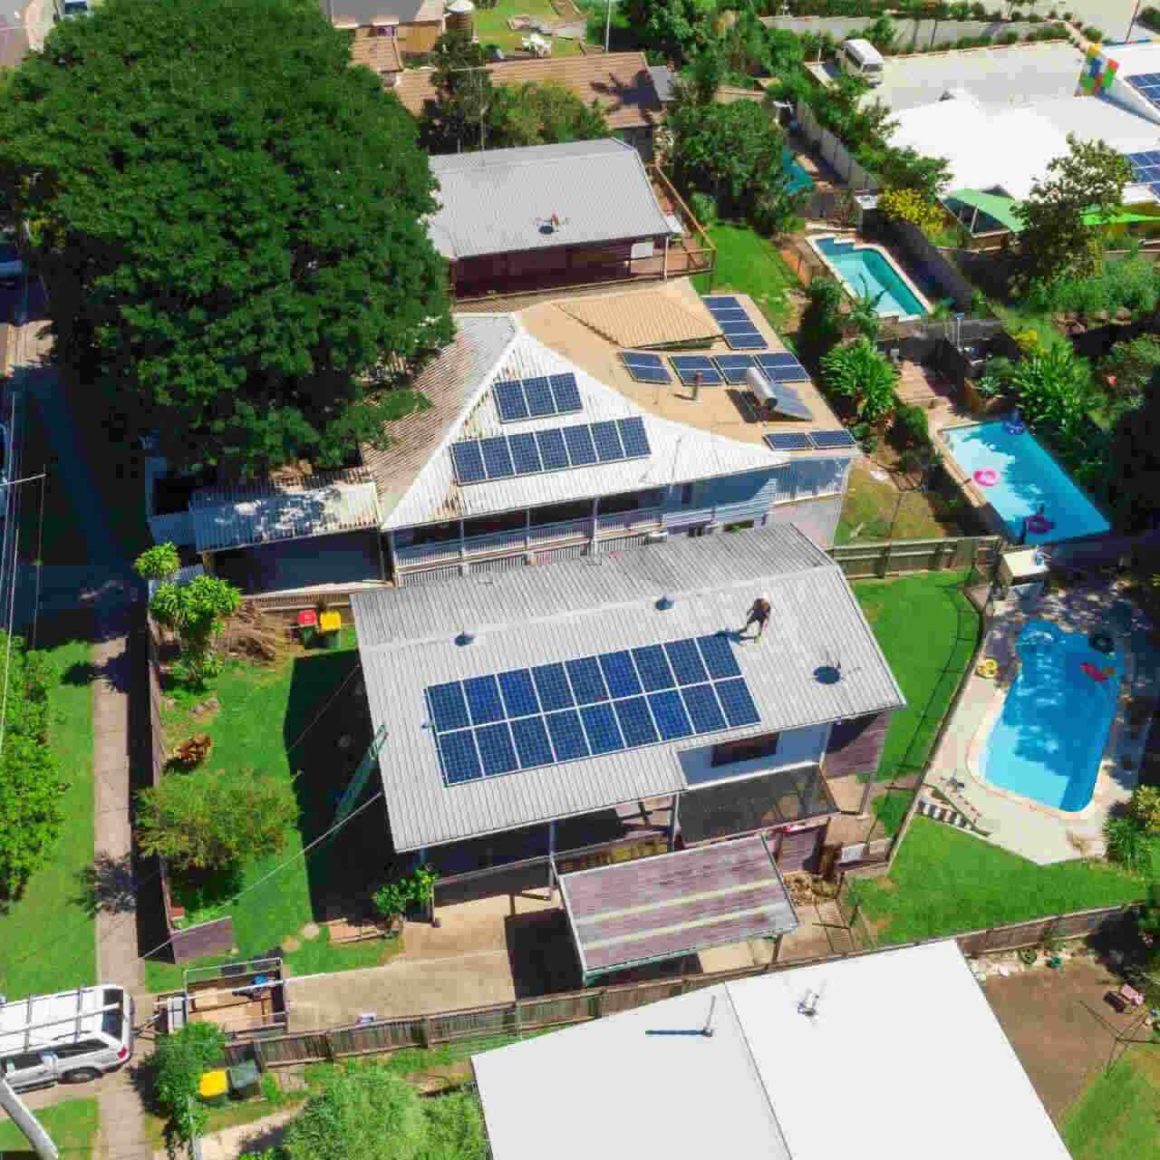 Sun tax: When it will hit, what it will cost – and why solar export... onestepoffthegrid.com.au/sun-tax-when-i… #SolarPowerSystem #SolarForAll